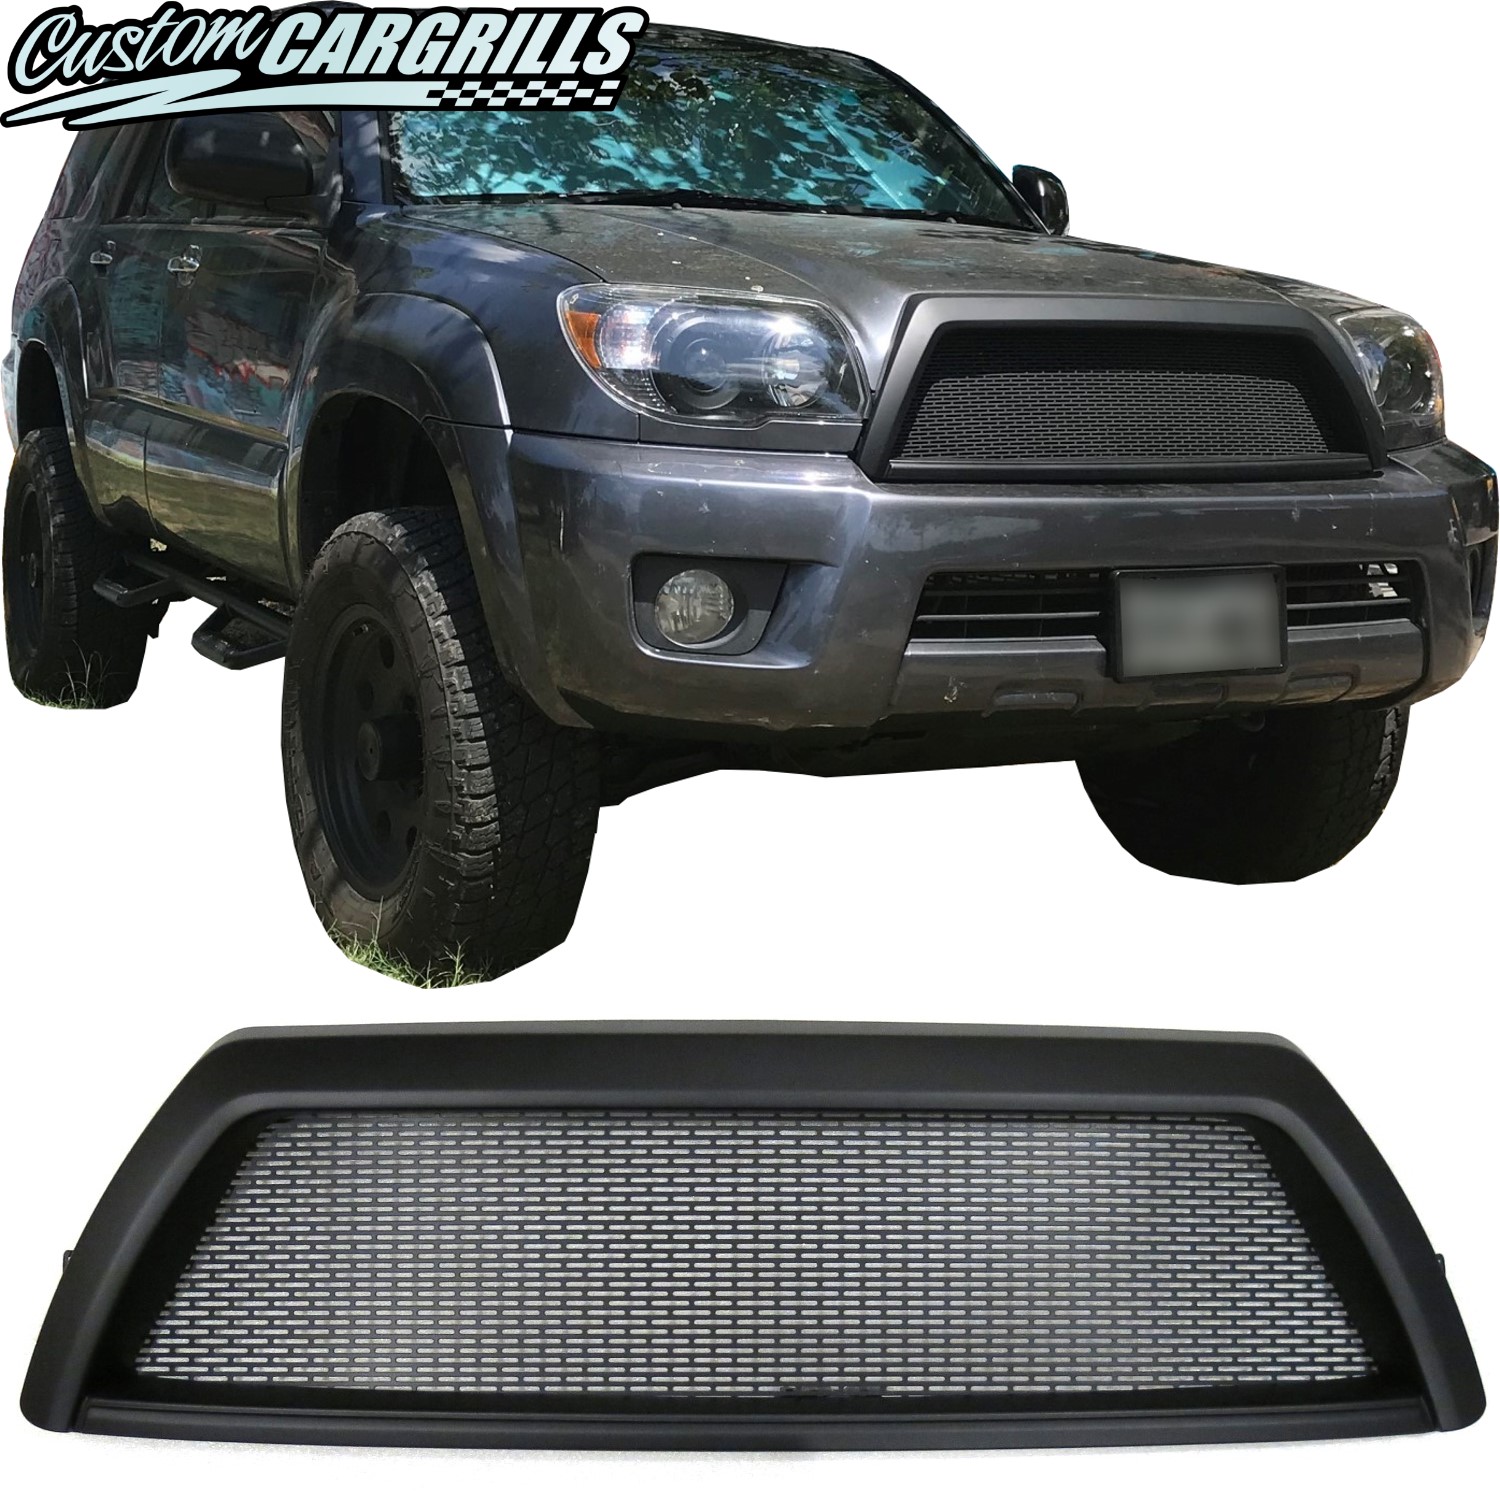 2006 - 2009 Toyota 4Runner Full Replacement Satoshi Grille